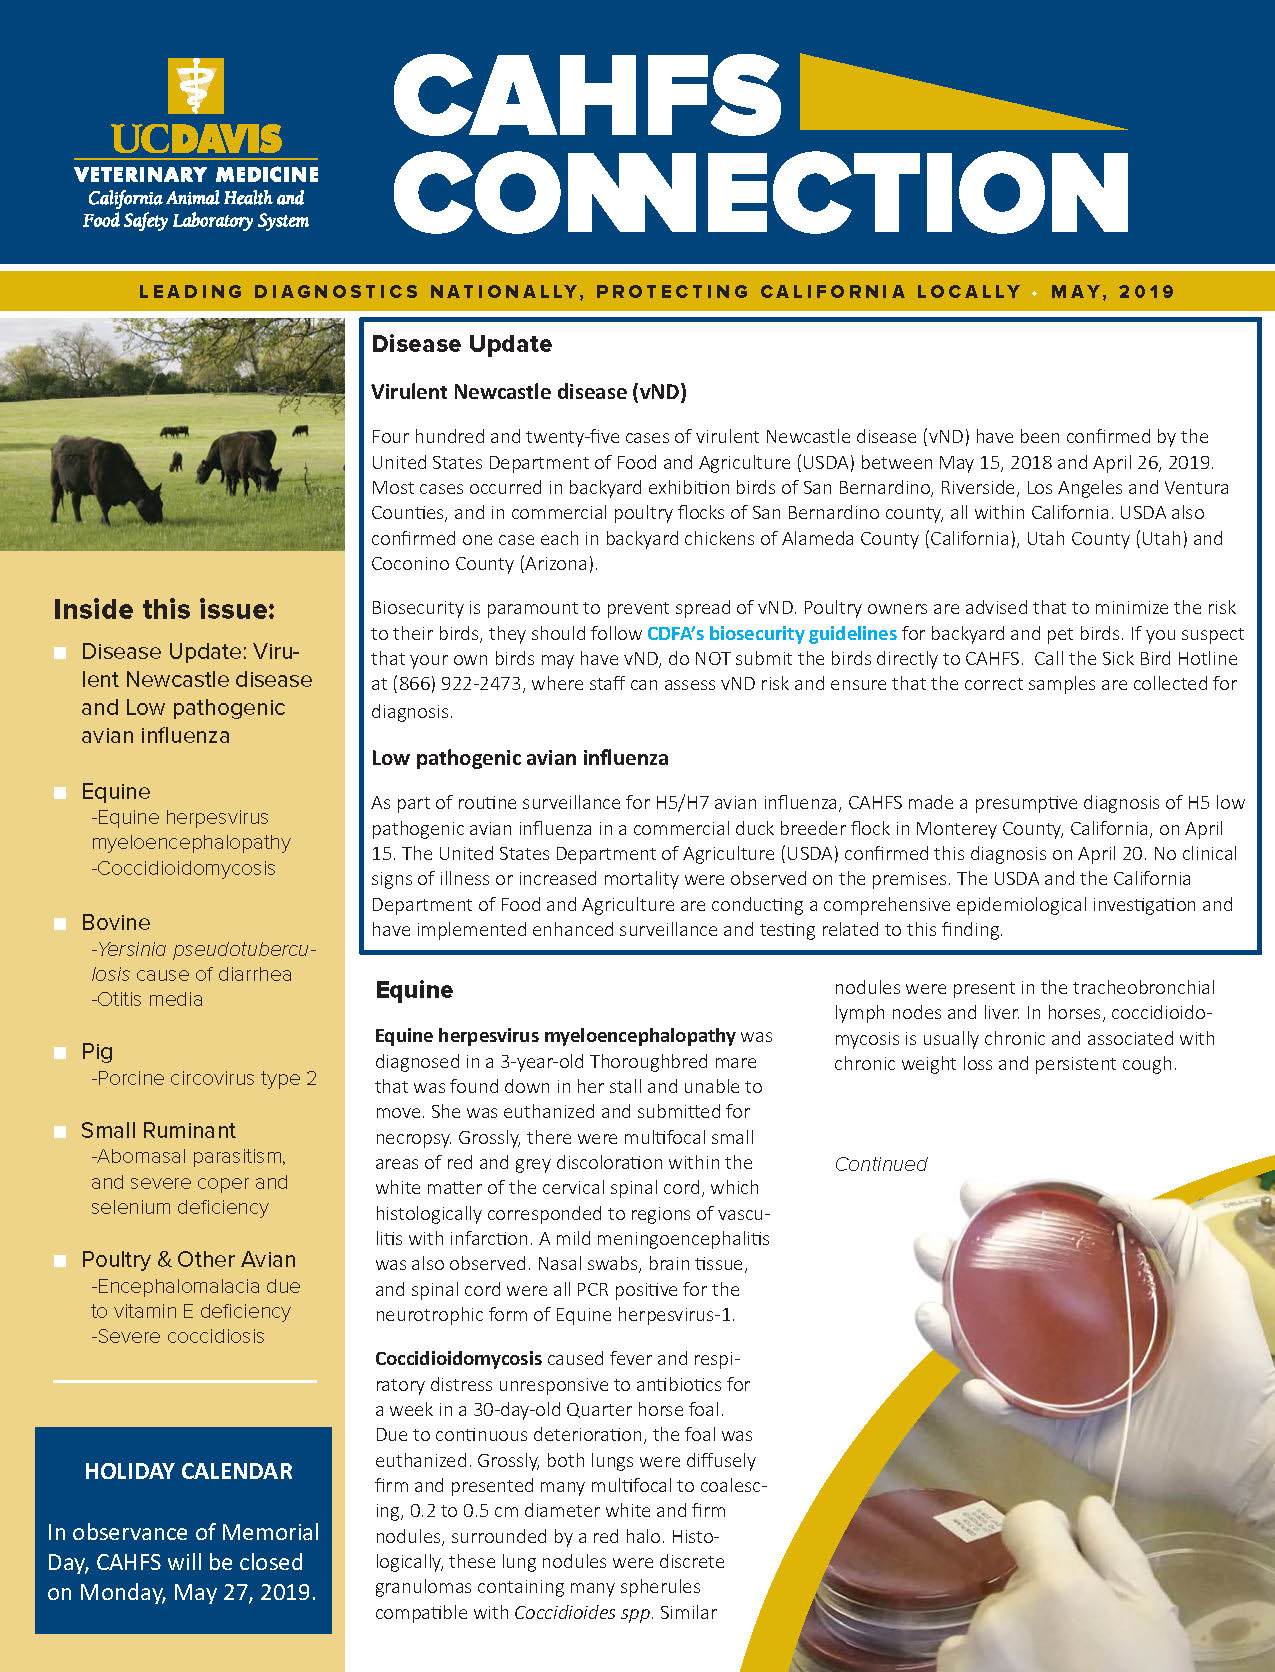 CAHFS Connection Newsletter May 2019